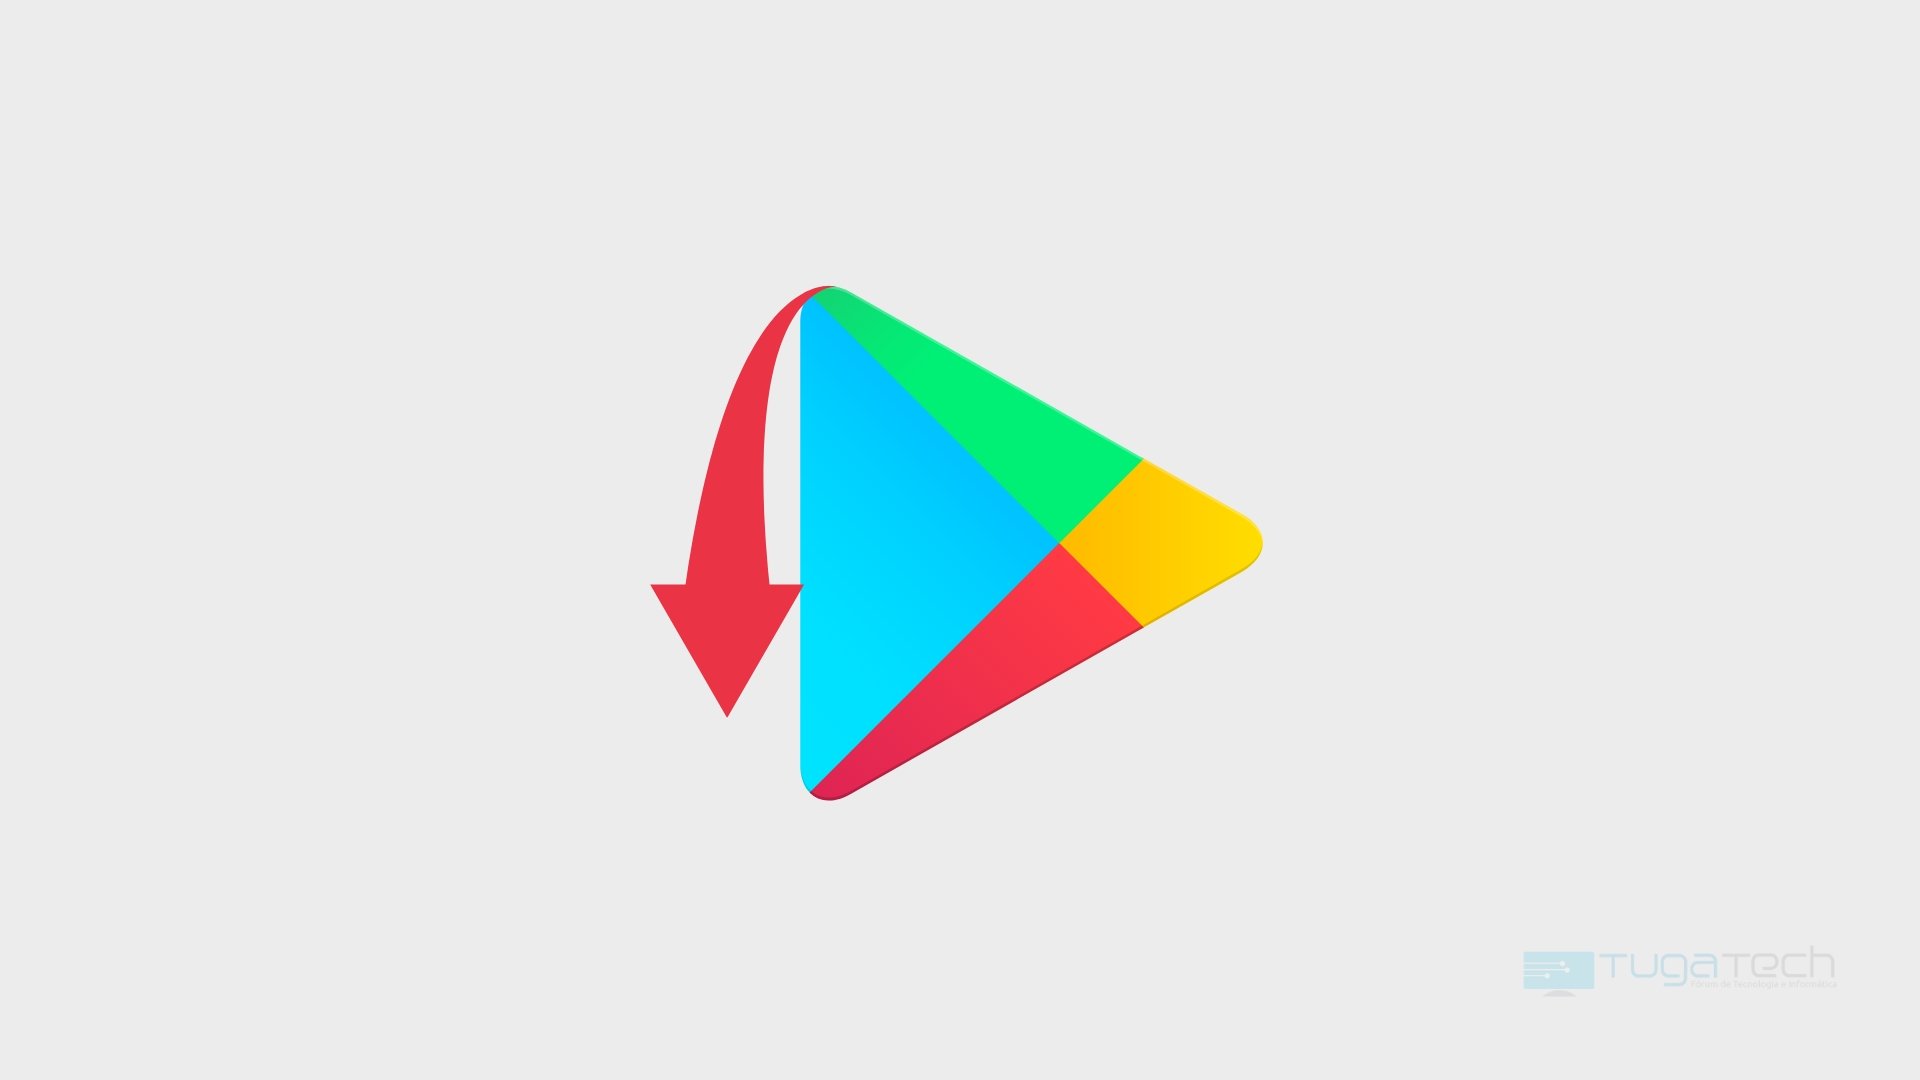 Google Play Store download